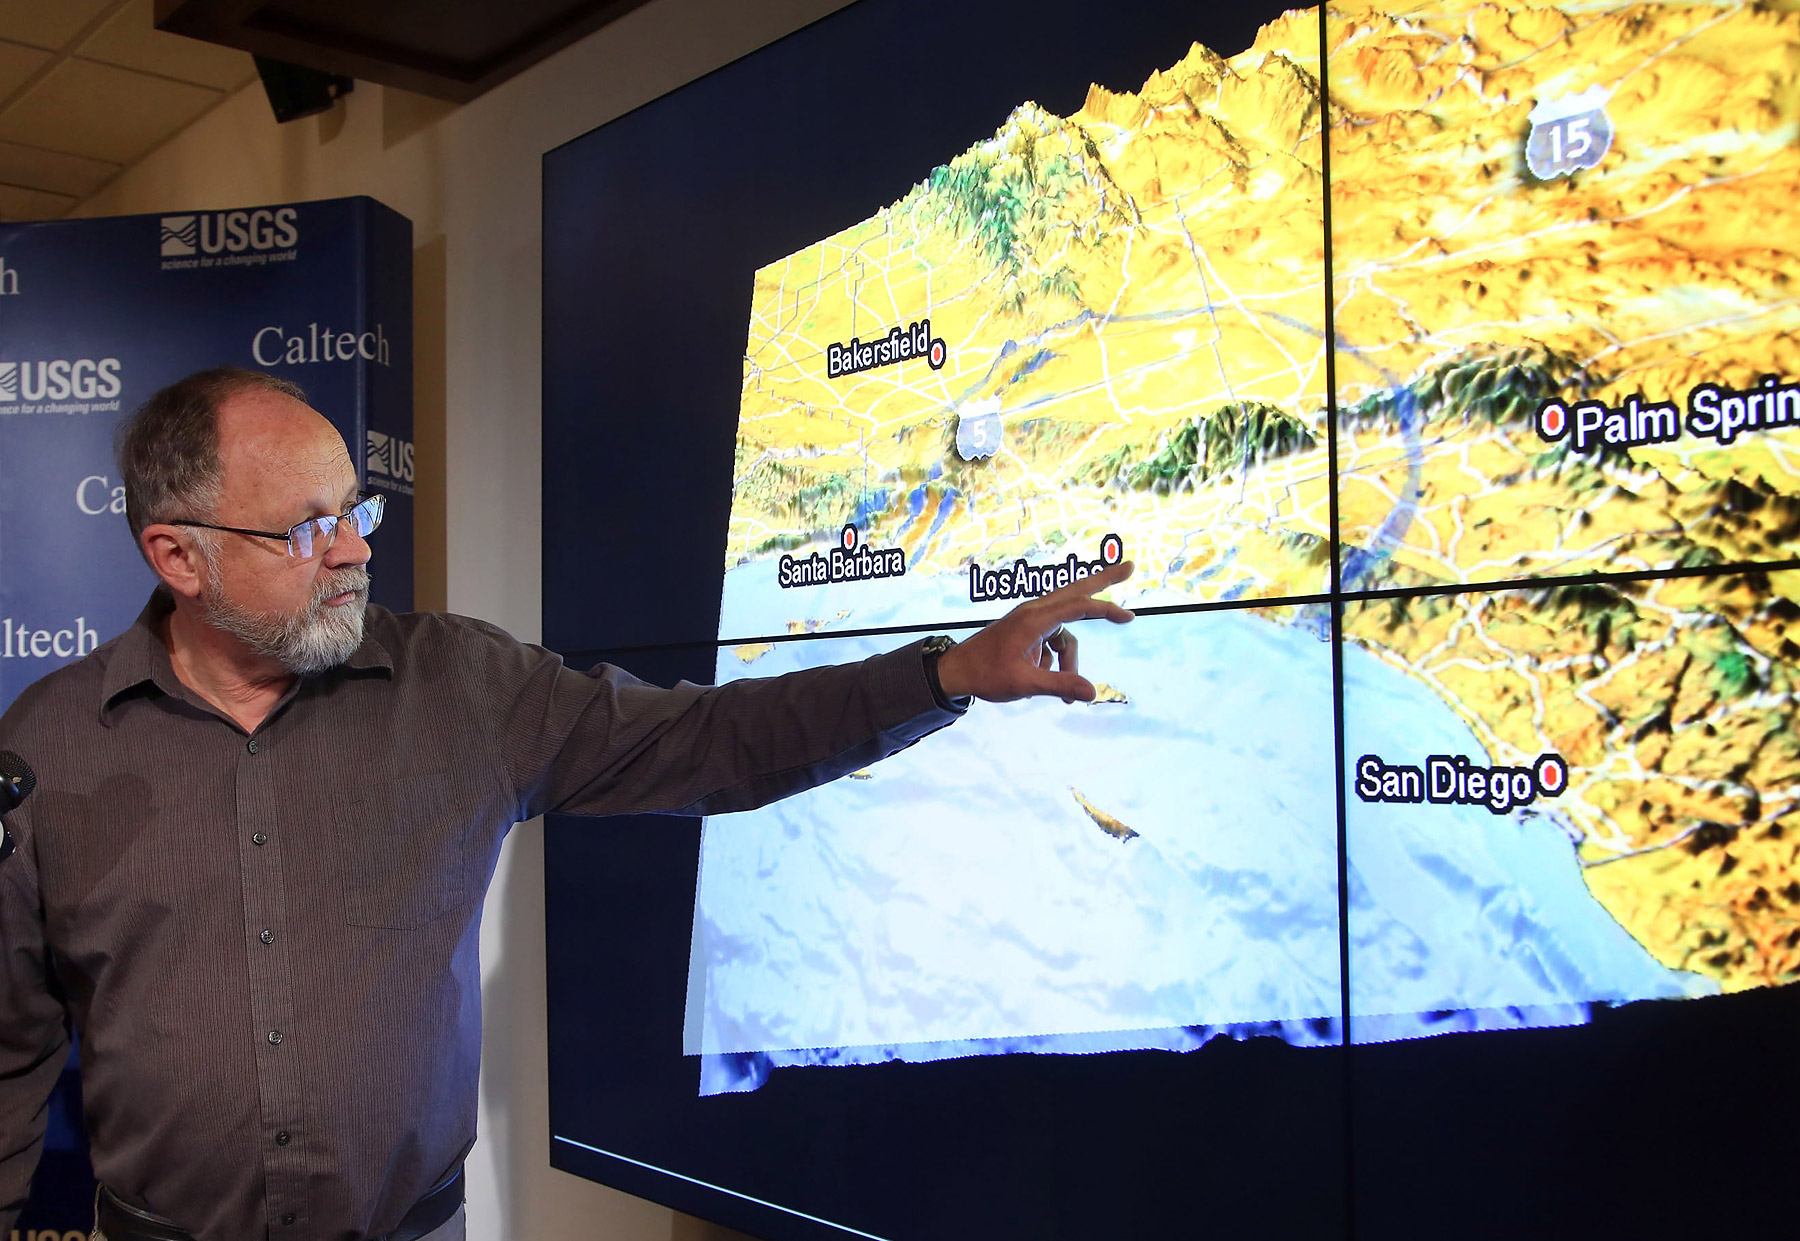 Egill Hauksson, a Caltech seismologist, talks about an early morning earthquake during a news conference at Caltech in Pasadena, Calif, on Monday, March 17, 2014. (Nick Ut—AP)